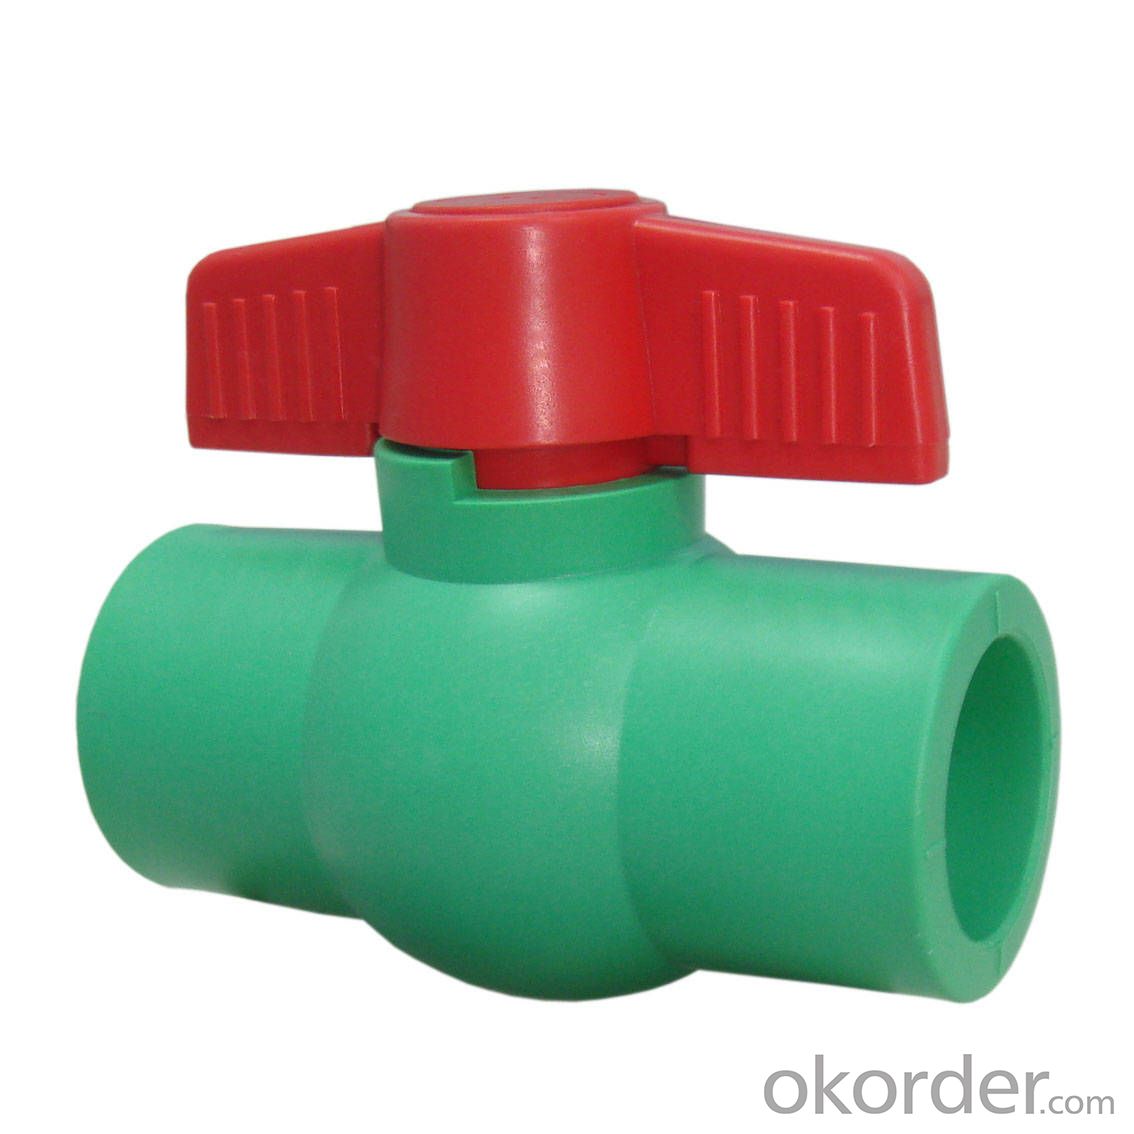 PPR orbital Ball Valve Fittings used in Industrial Fields Made in China Factory